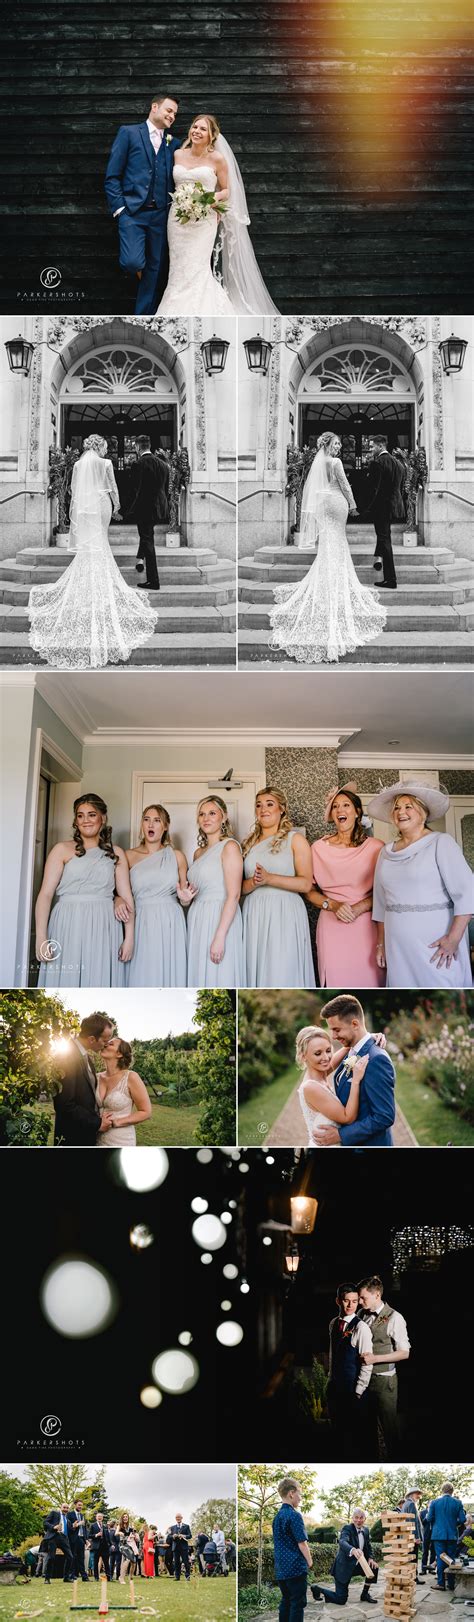 The Best Of Wedding Photography 2019 Parkershots Photography